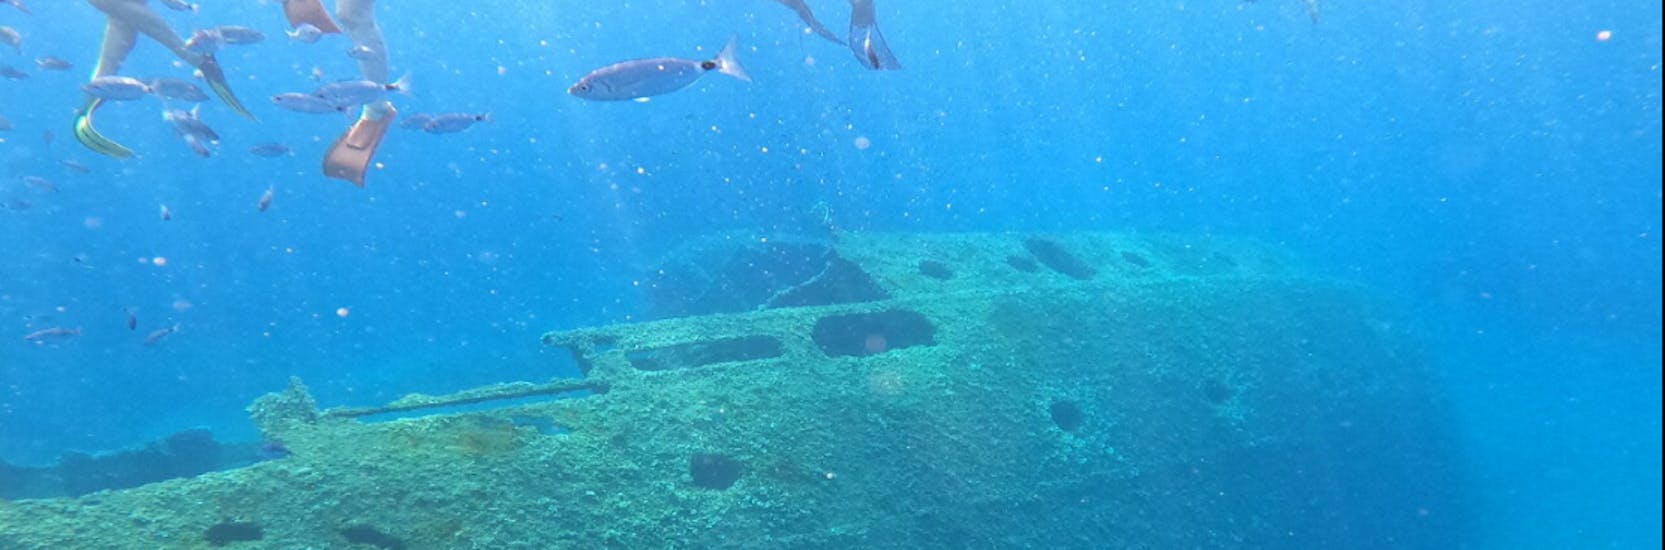 View of the wreck during our boat Trip to the Pomonte Wreck and the Grotta Azzurra with Motobarca Mickey Mouse Elba.